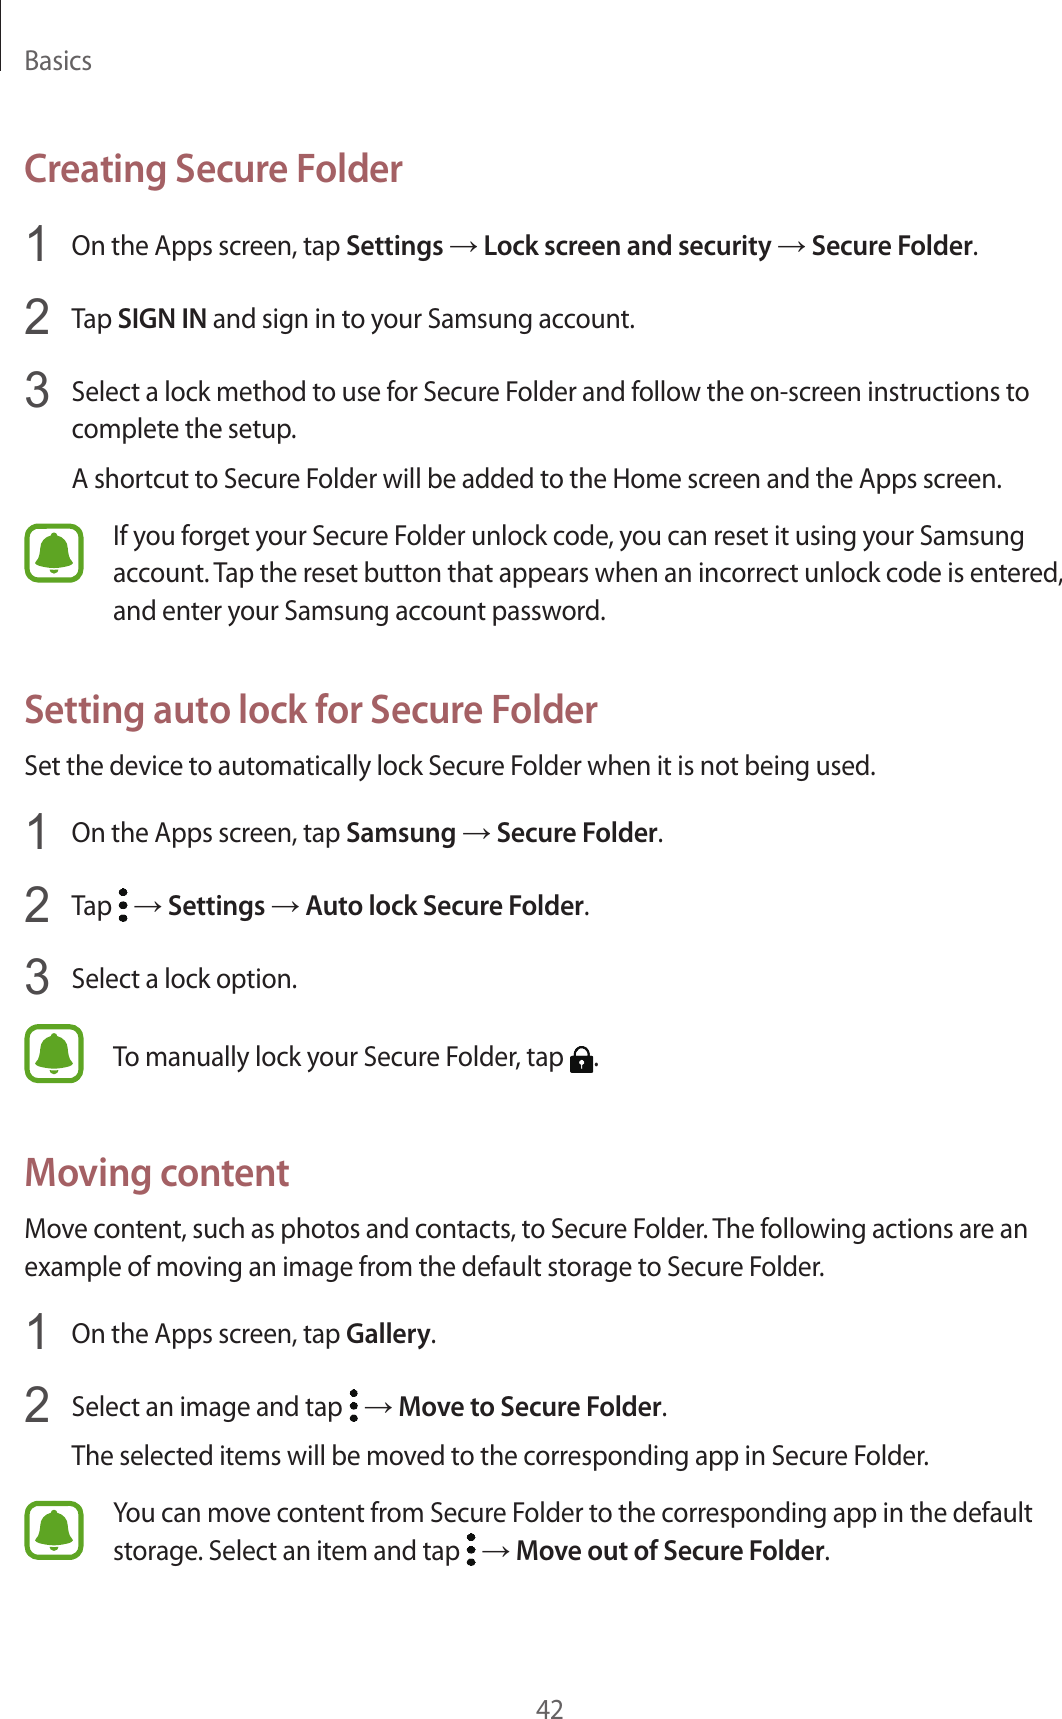 Basics42Creating Secure Folder1  On the Apps screen, tap Settings → Lock screen and security → Secure Folder.2  Tap SIGN IN and sign in to your Samsung account.3  Select a lock method to use for Secure Folder and follow the on-screen instructions to complete the setup.A shortcut to Secure Folder will be added to the Home screen and the Apps screen.If you forget your Secure Folder unlock code, you can reset it using your Samsung account. Tap the reset button that appears when an incorrect unlock code is entered, and enter your Samsung account password.Setting auto lock for Secure FolderSet the device to automatically lock Secure Folder when it is not being used.1  On the Apps screen, tap Samsung → Secure Folder.2  Tap   → Settings → Auto lock Secure Folder.3  Select a lock option.To manually lock your Secure Folder, tap  .Moving contentMove content, such as photos and contacts, to Secure Folder. The following actions are an example of moving an image from the default storage to Secure Folder.1  On the Apps screen, tap Gallery.2  Select an image and tap   → Move to Secure Folder.The selected items will be moved to the corresponding app in Secure Folder.You can move content from Secure Folder to the corresponding app in the default storage. Select an item and tap   → Move out of Secure Folder.